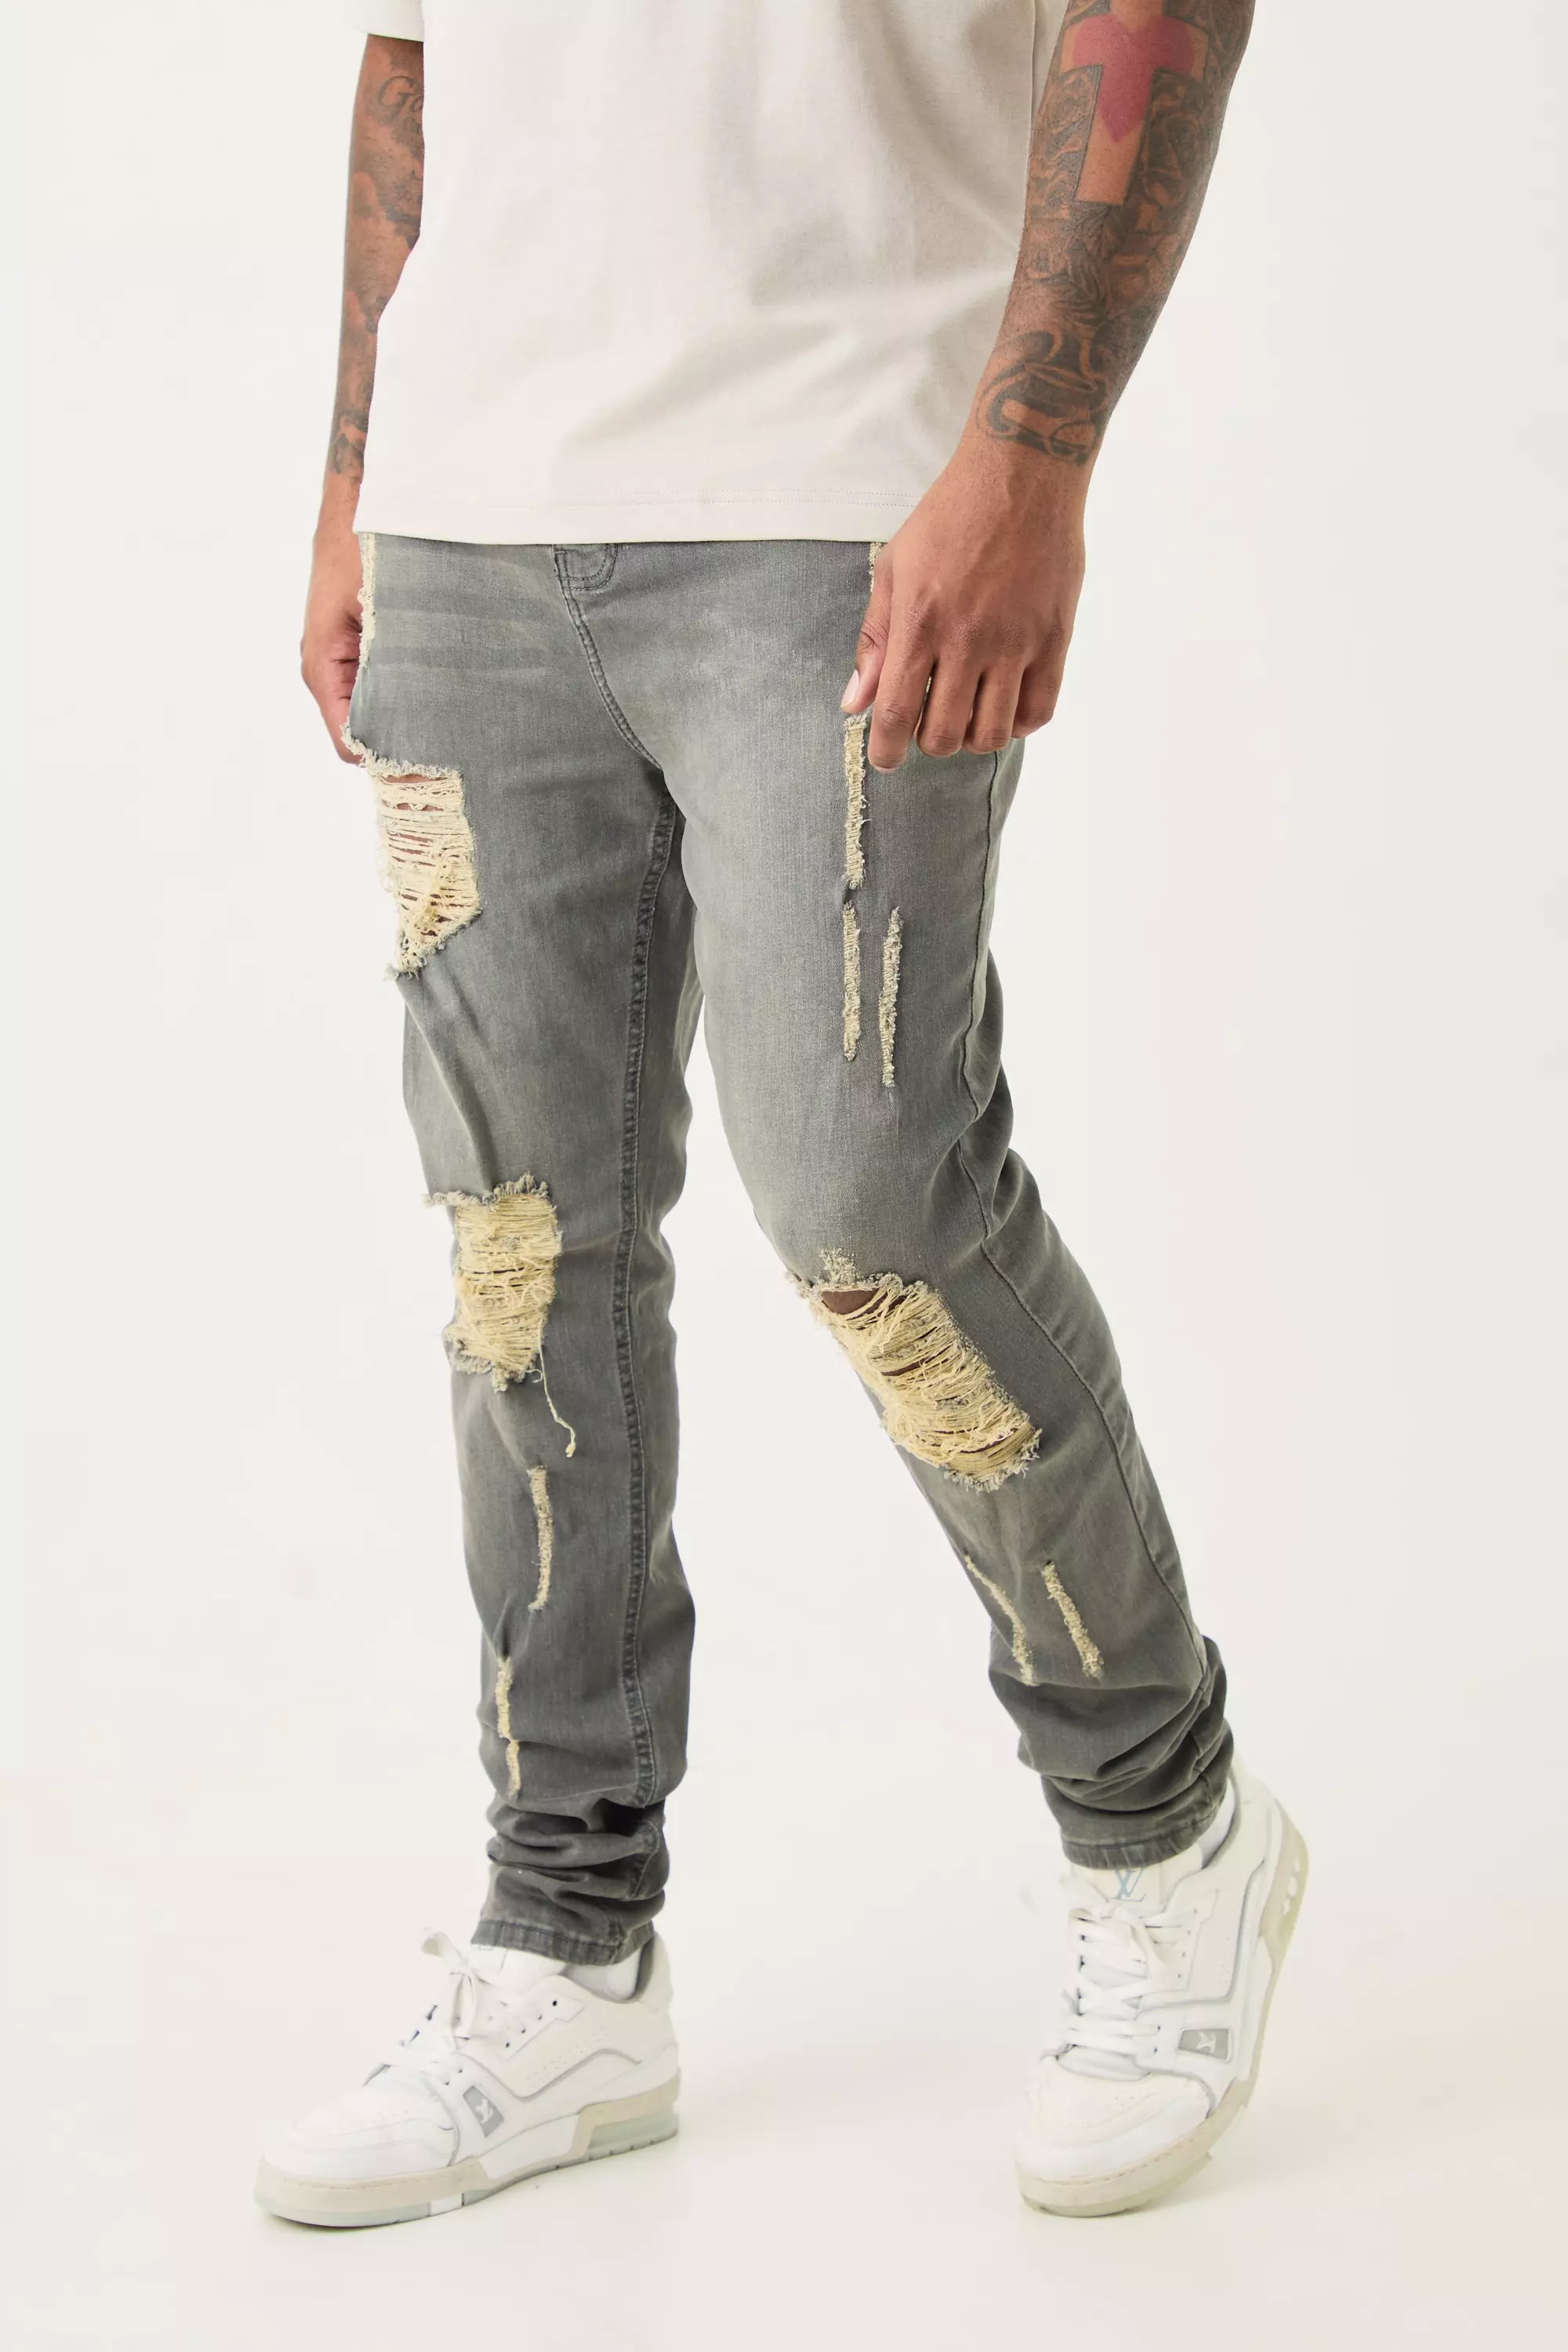 Men Stacked Jeans, Men Ripped Jeans Skinny Fit Stacked Leg Denim Stretch  Jeans Streetwear Trousers (Color : Brown, Size : Medium) : :  Clothing, Shoes & Accessories